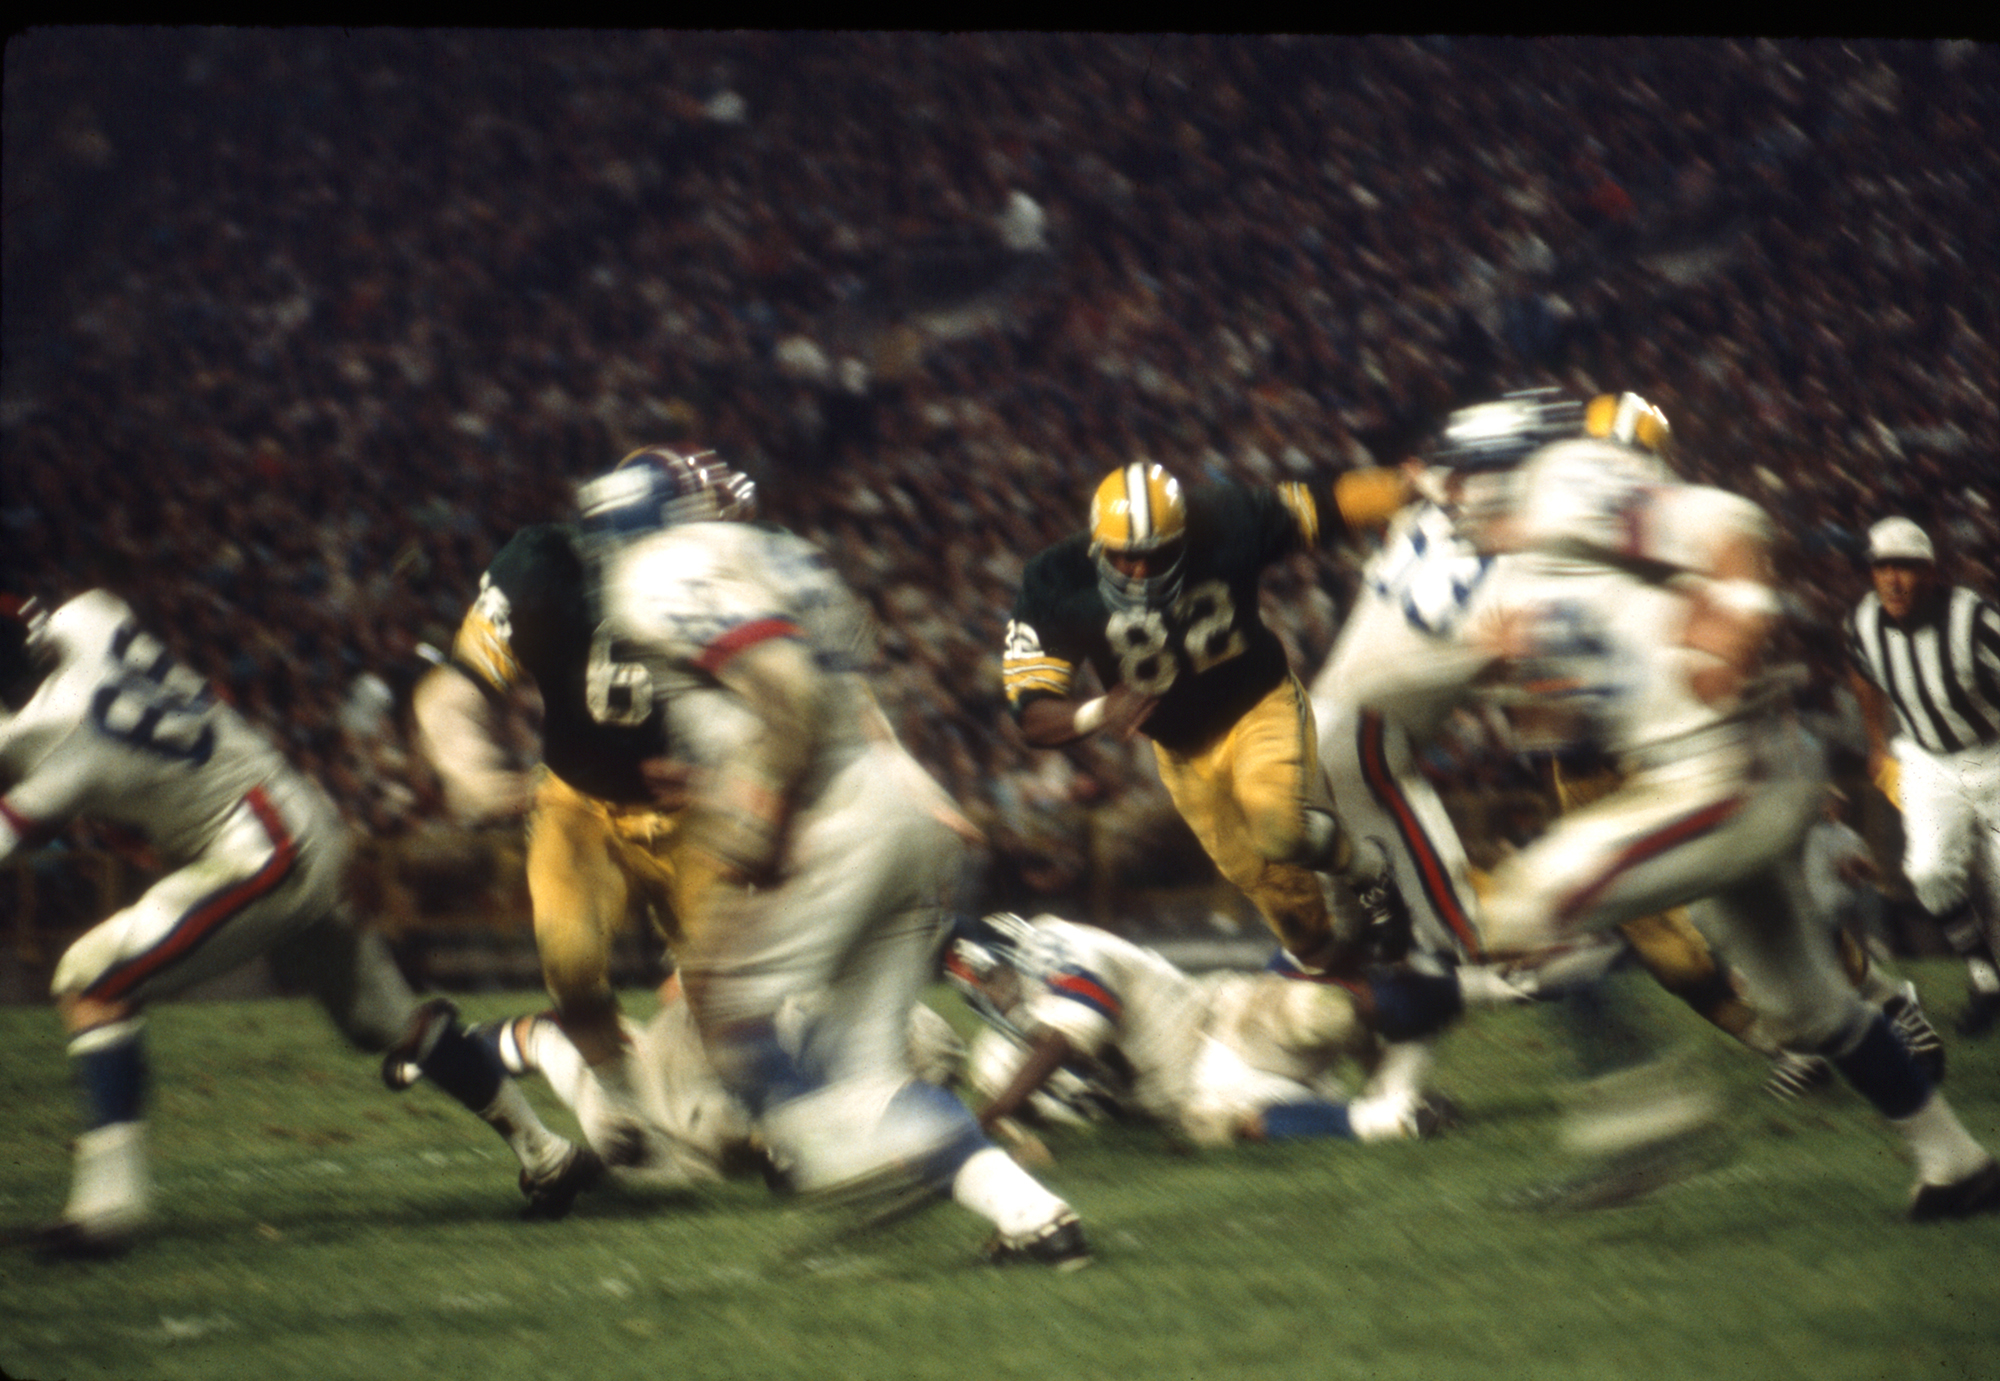 In a blur of excitement Lionel Aldridge (82) and Ray Nitschke (66) push through the Giants offense